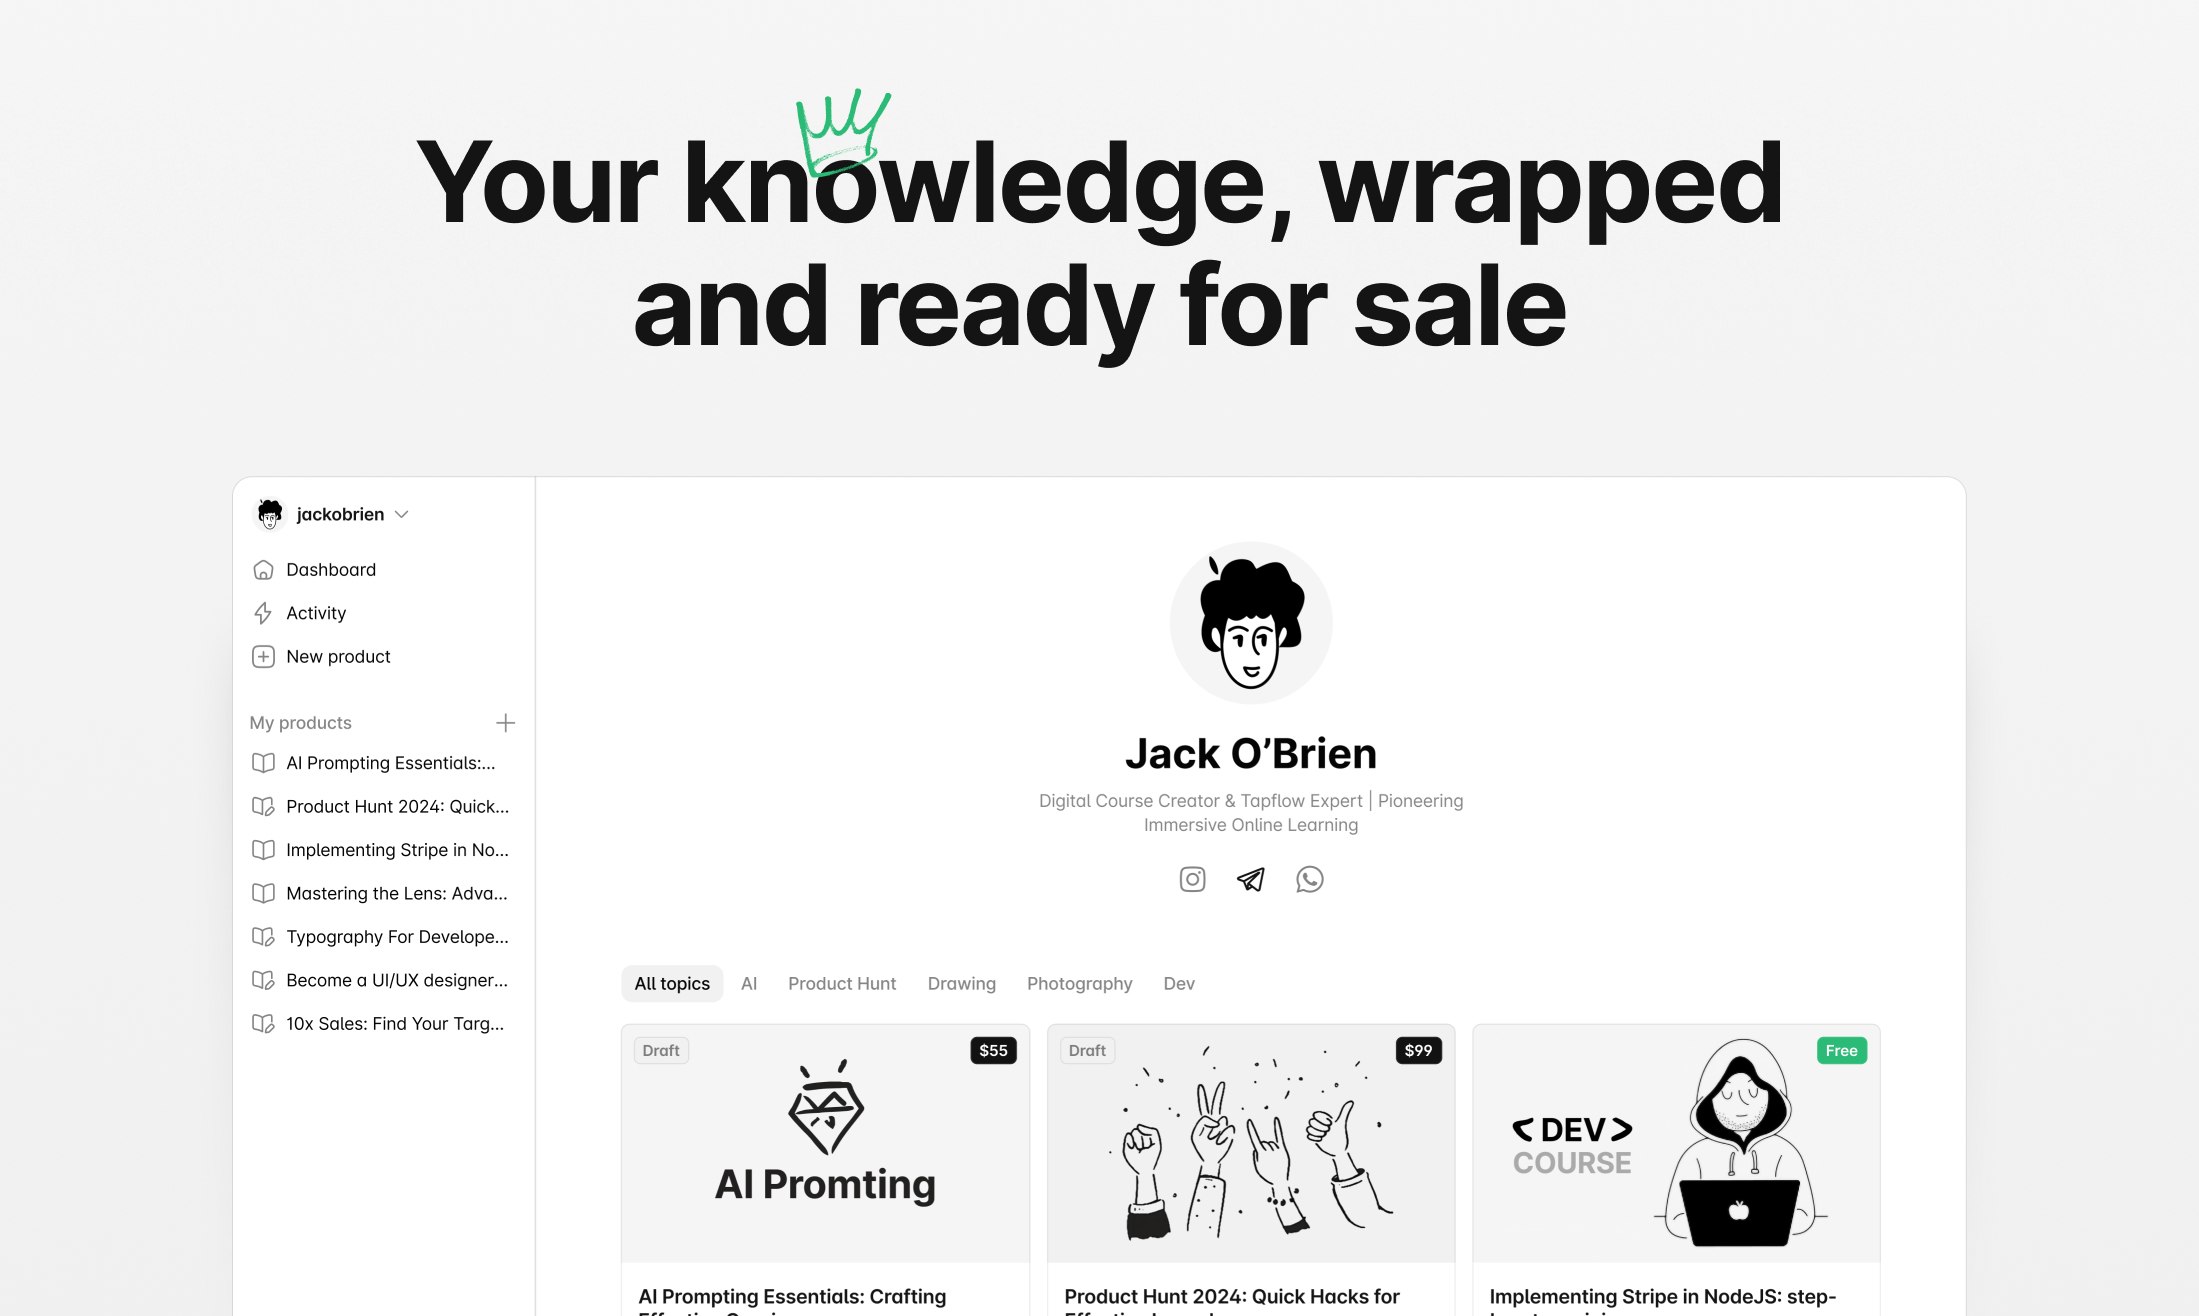 tapflow-1-0 - Your knowledge, wrapped and ready for sale